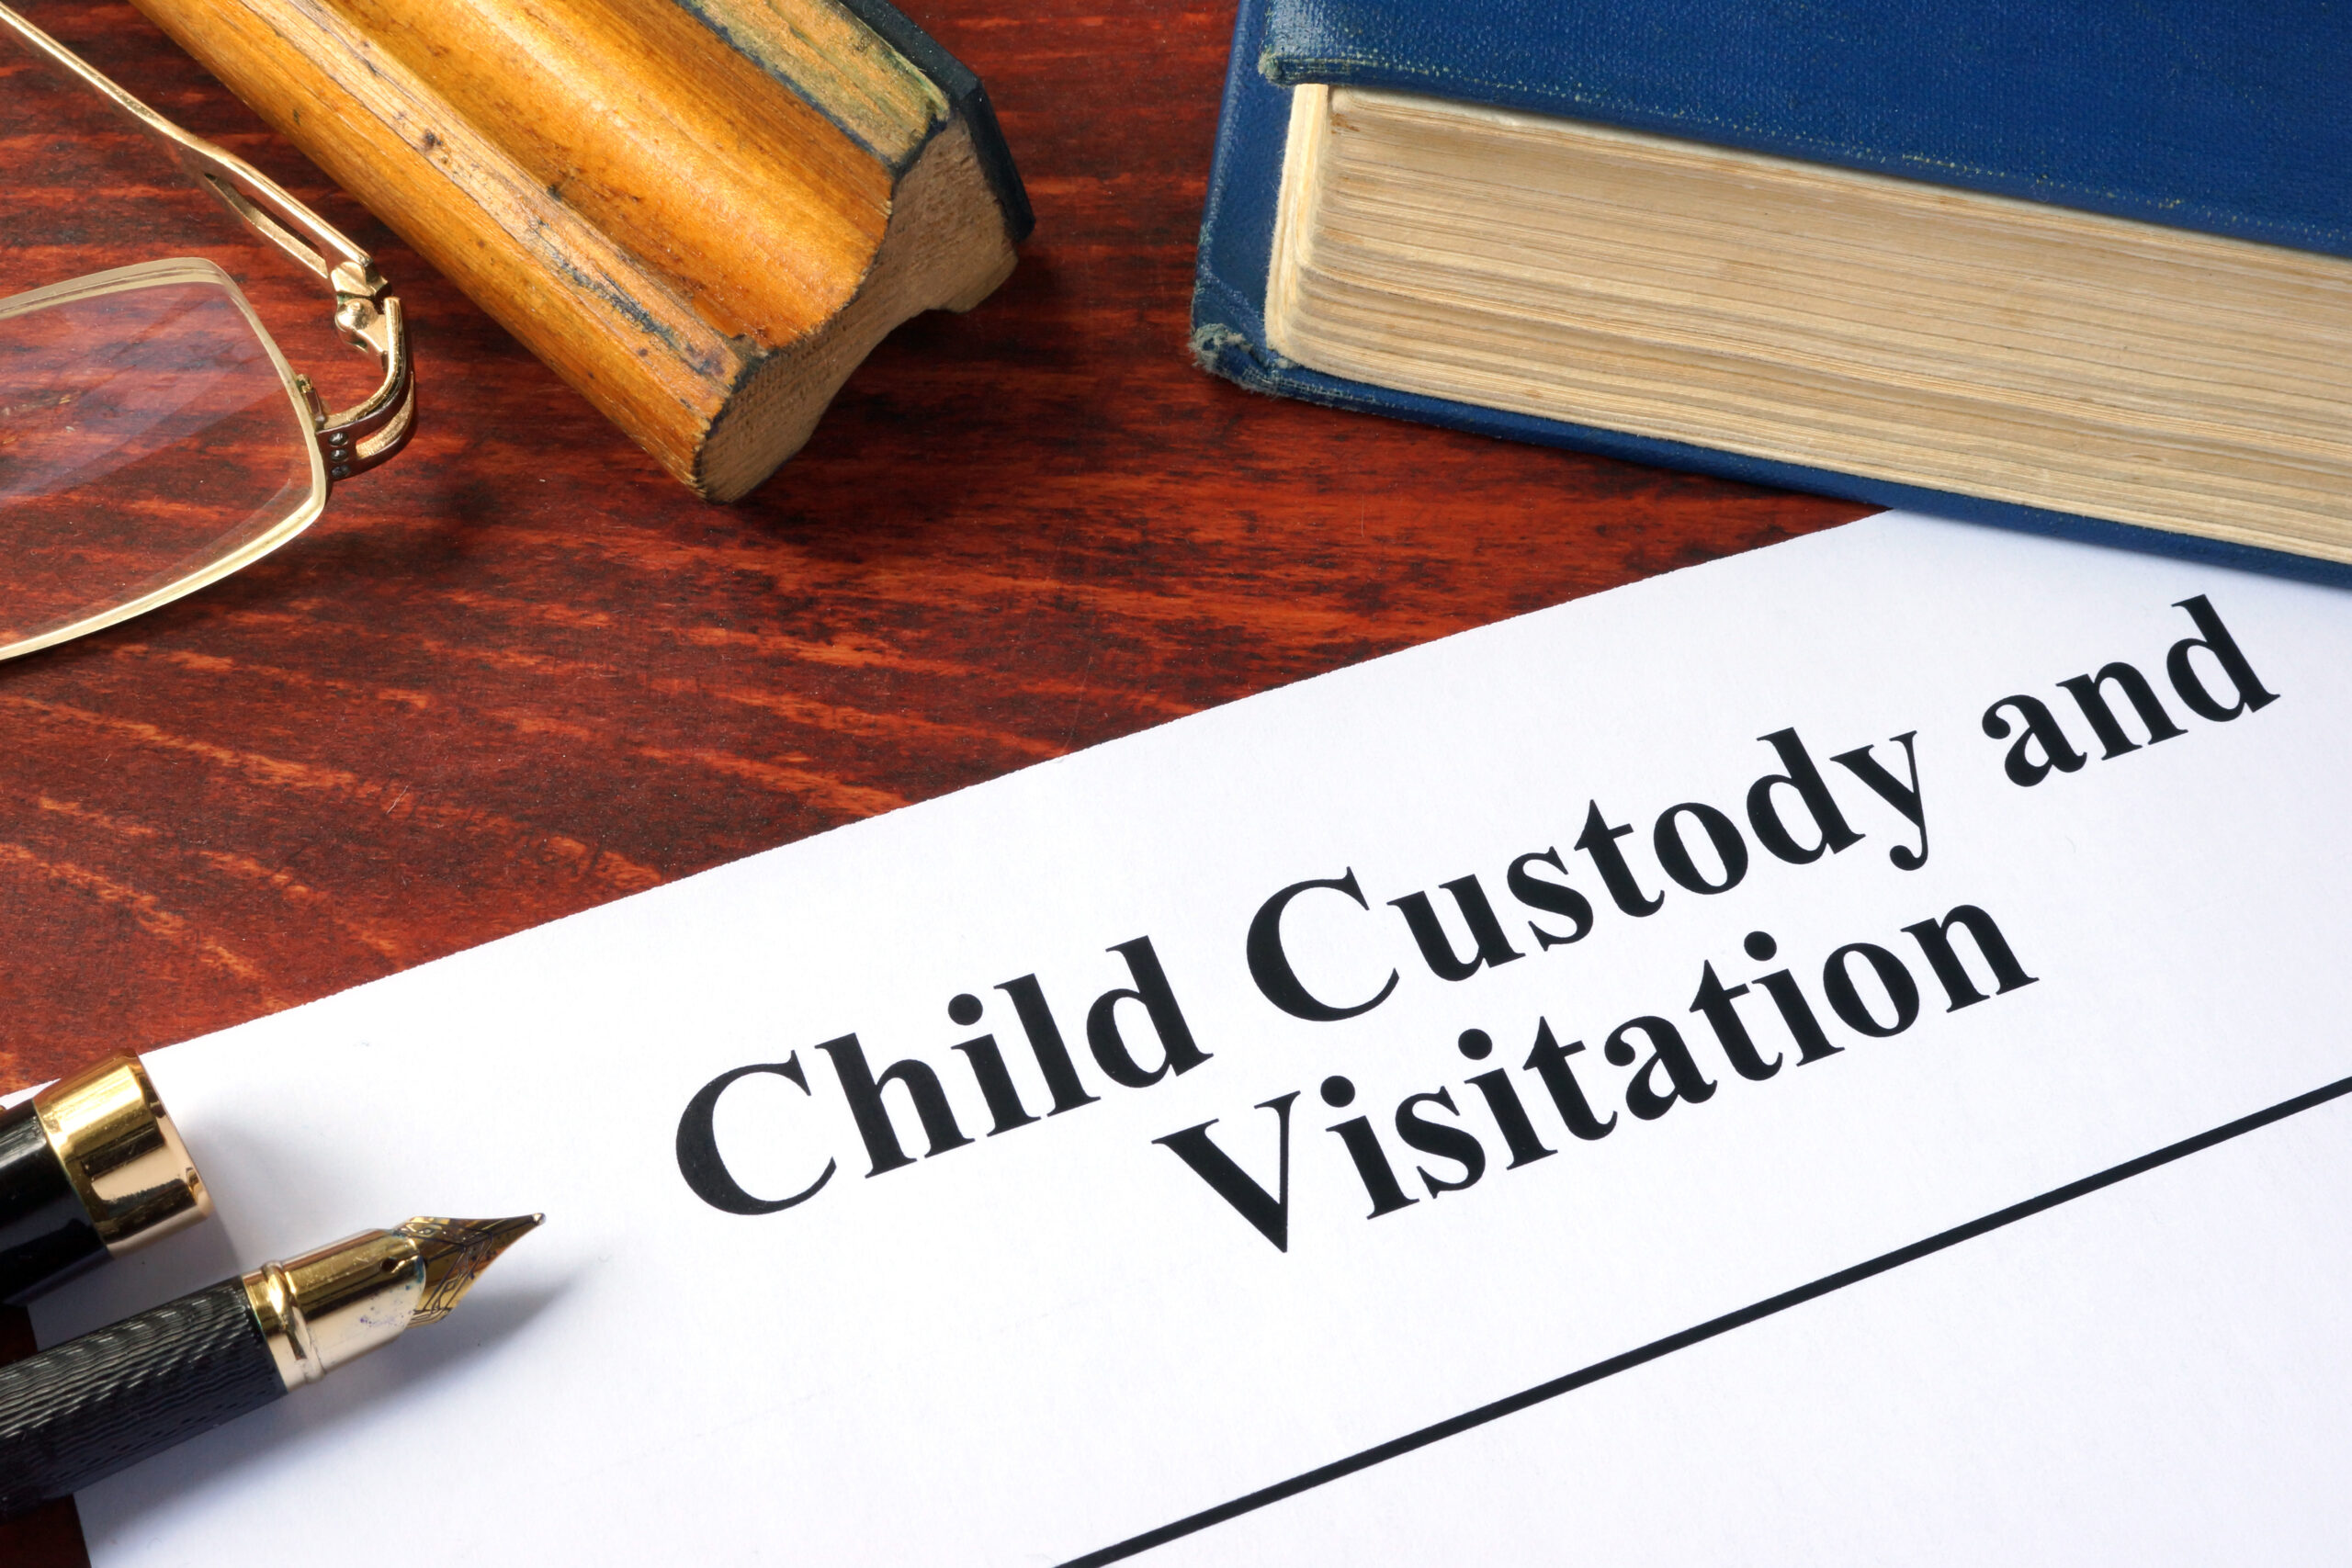 Child Custody and Visitation written on a paper and a book.